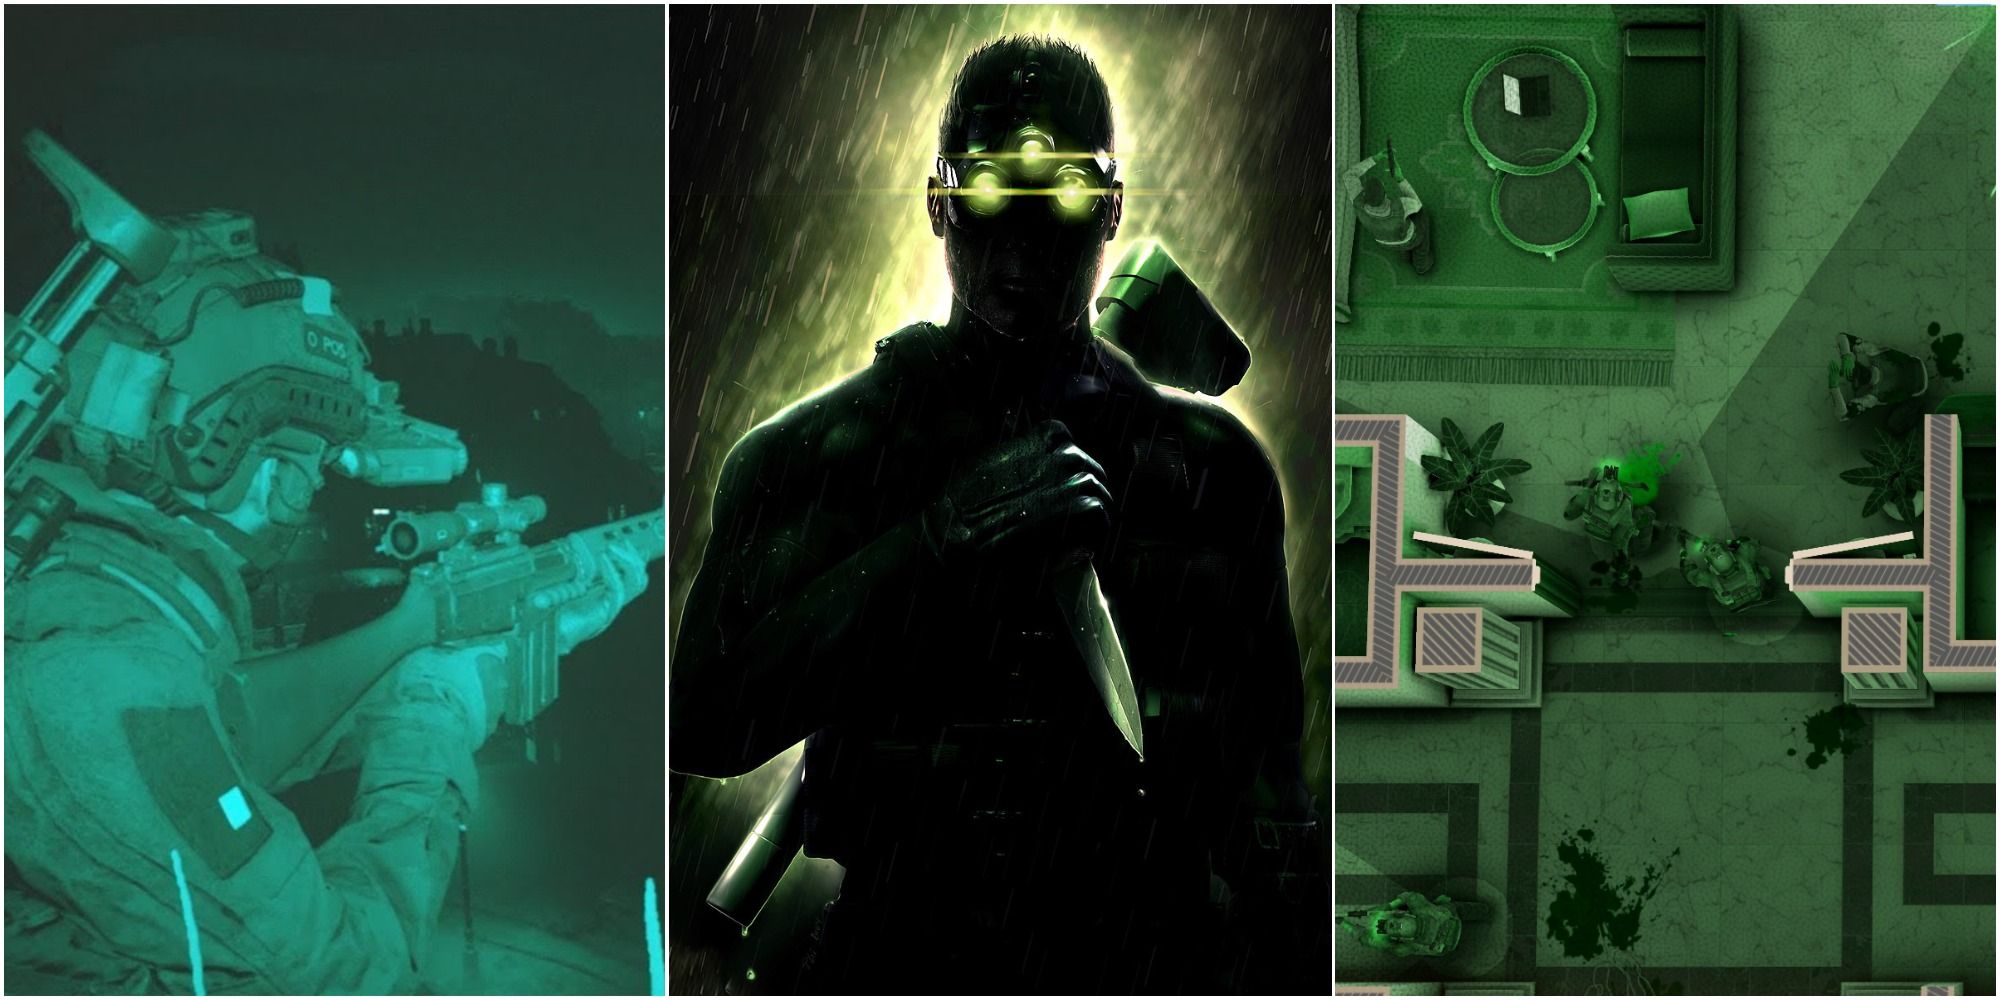 Best Games With Night Vision Featured Image showing CoD Modern Warfare, Sam Fisher, and Door Kickers 2